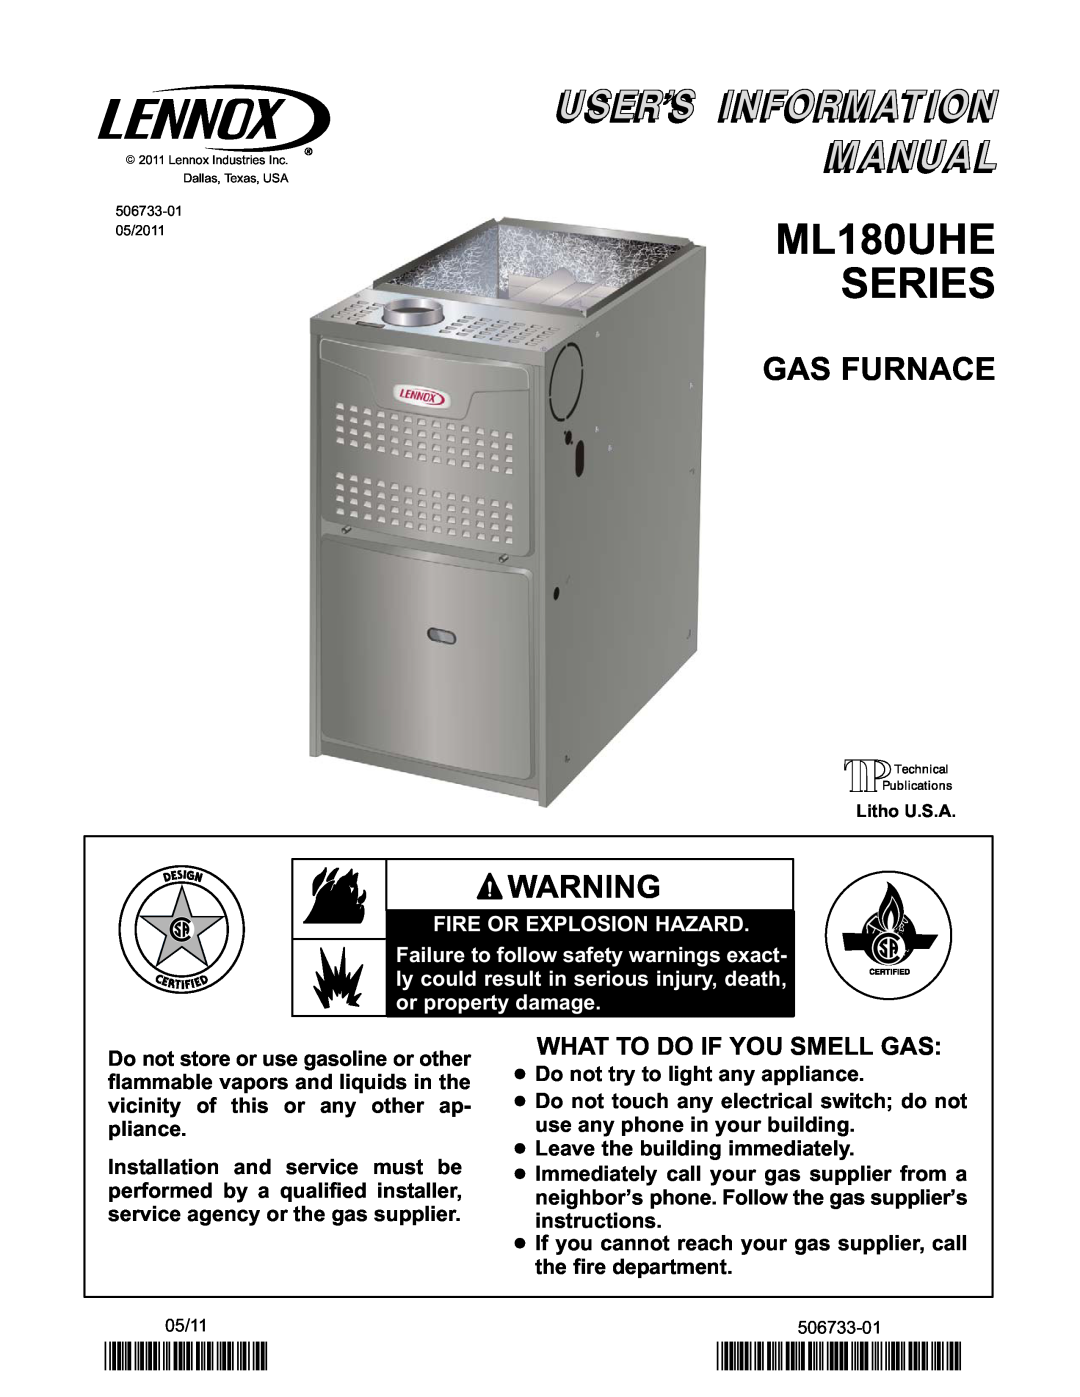 Lennox International Inc manual Gas Furnace, ML180UHE SERIES, 2P0511, P506733-01, What To Do If You Smell Gas 